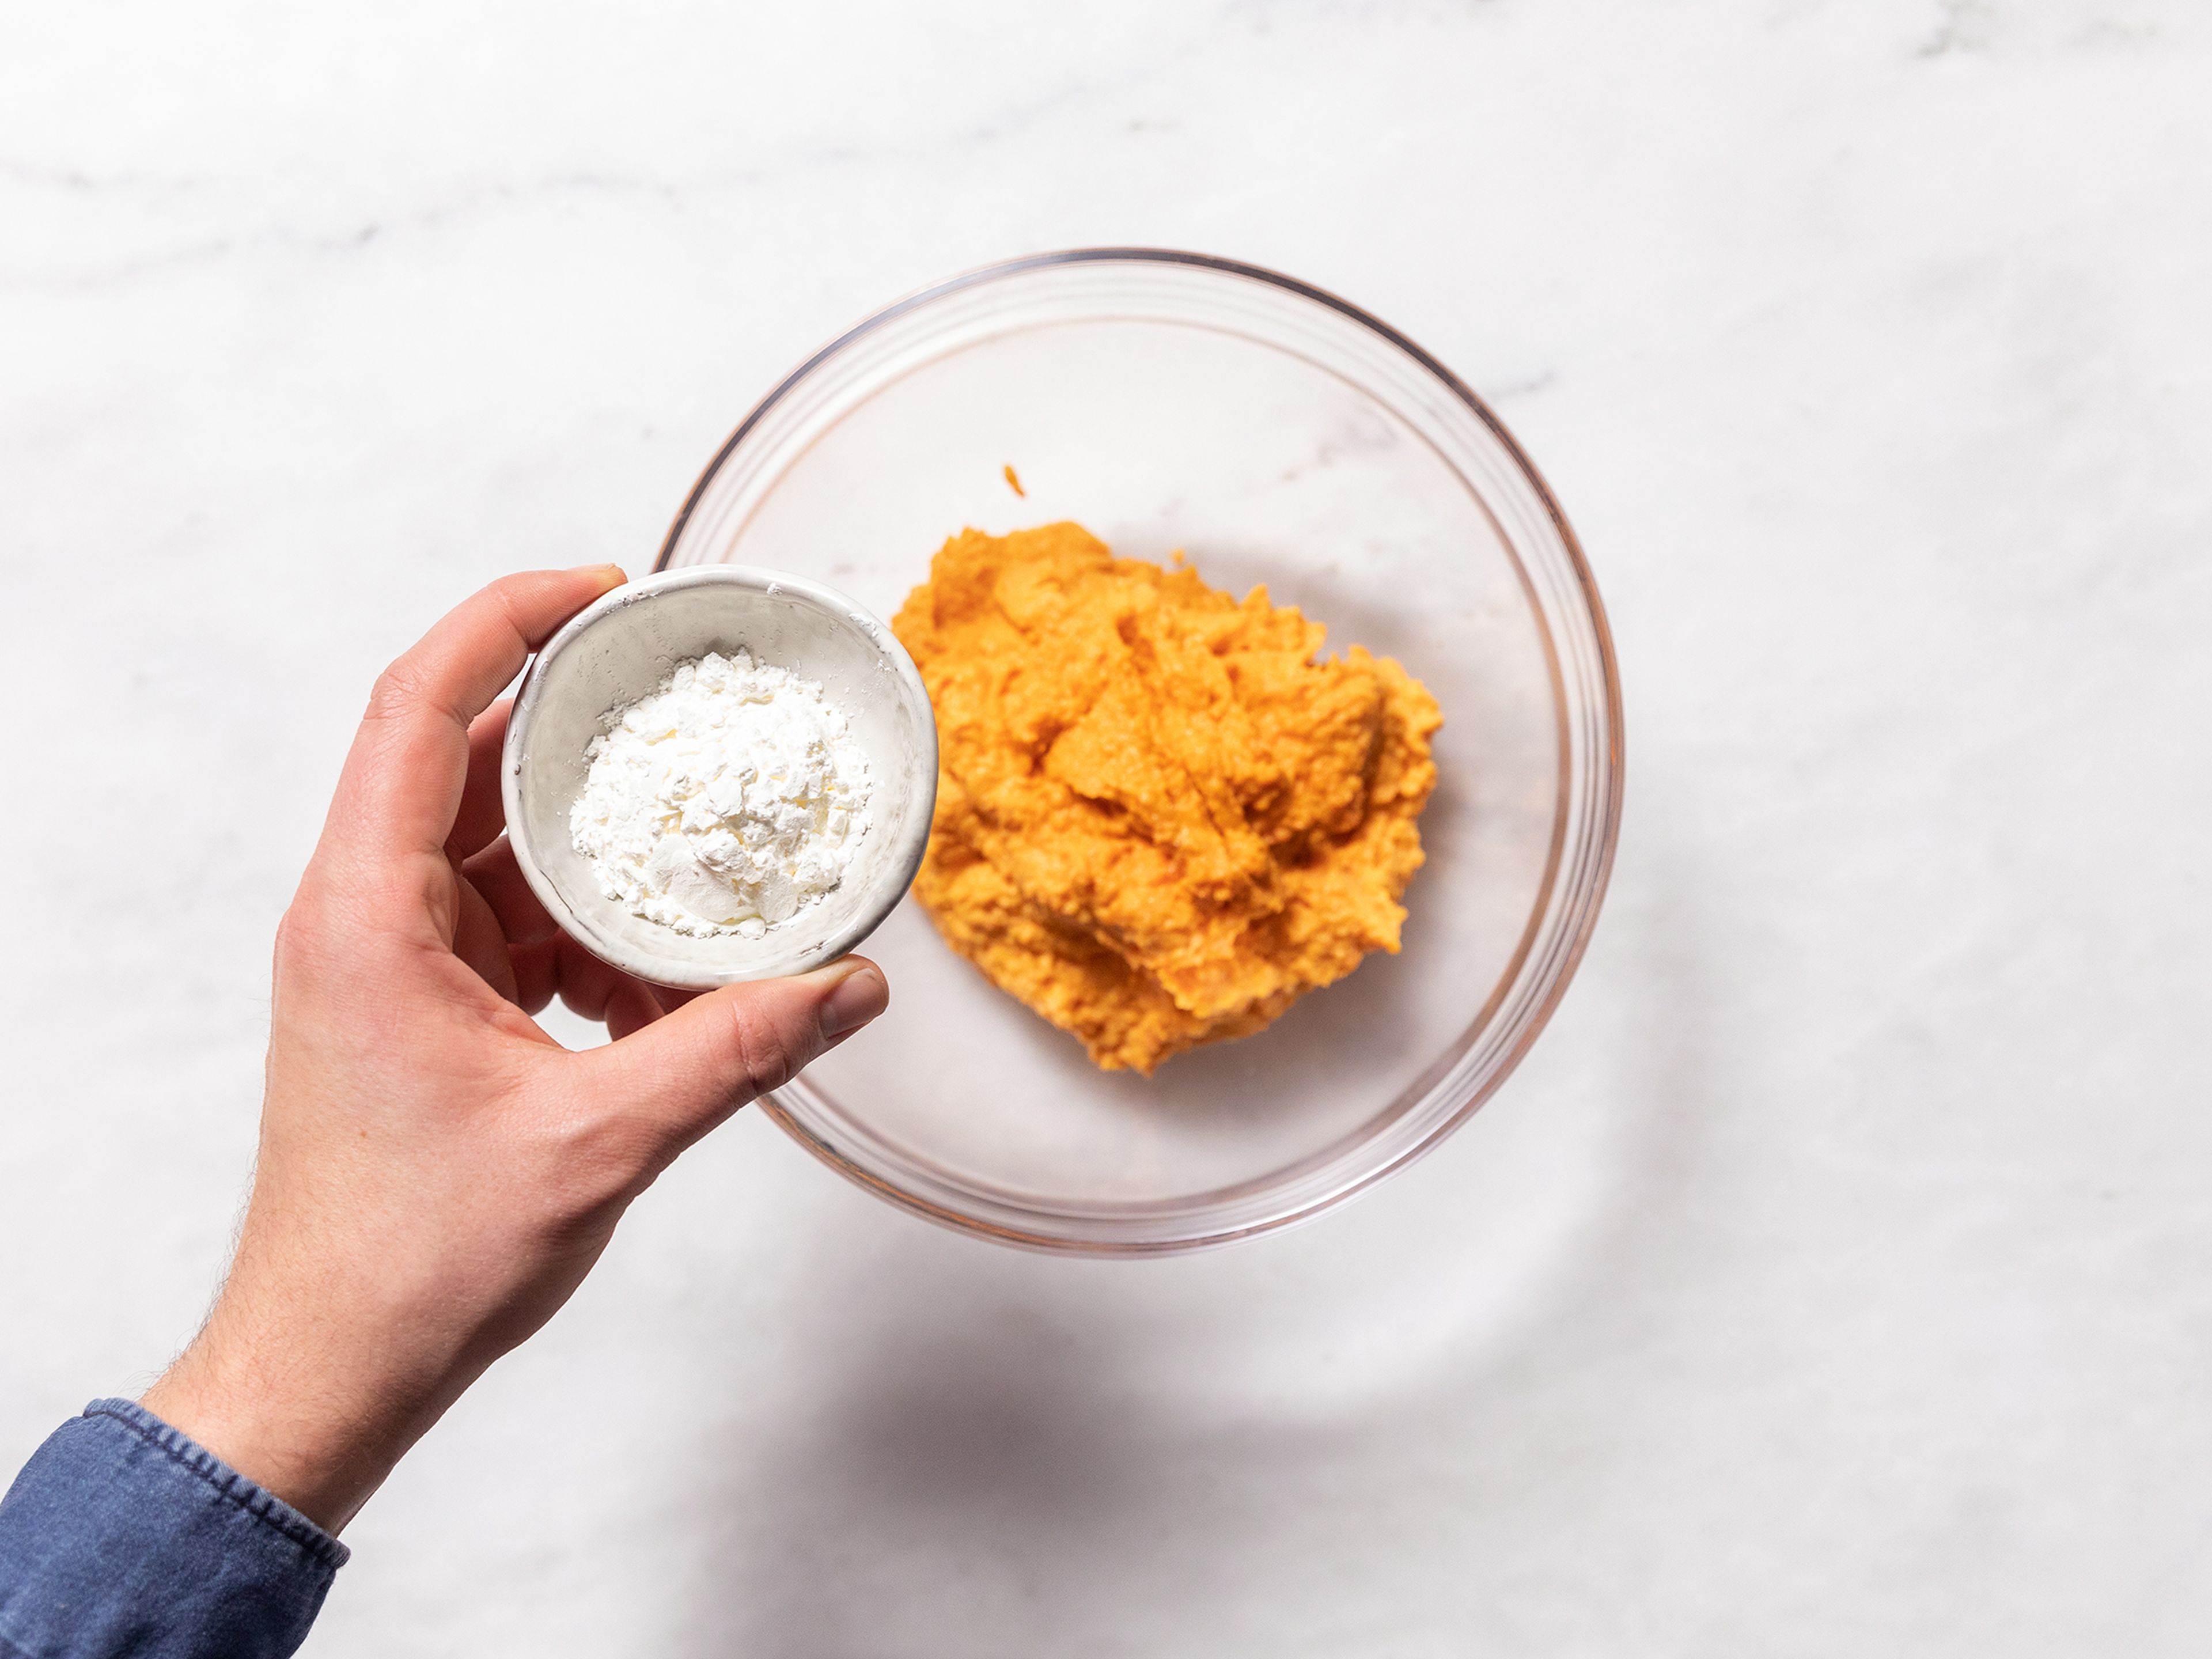 Add roasted carrots, ricotta cheese, egg, and some salt to a food processor and blend until smooth. Transfer carrot puree into a large bowl, add starch and flour gradually. Allow to cool in the fridge, if desired.